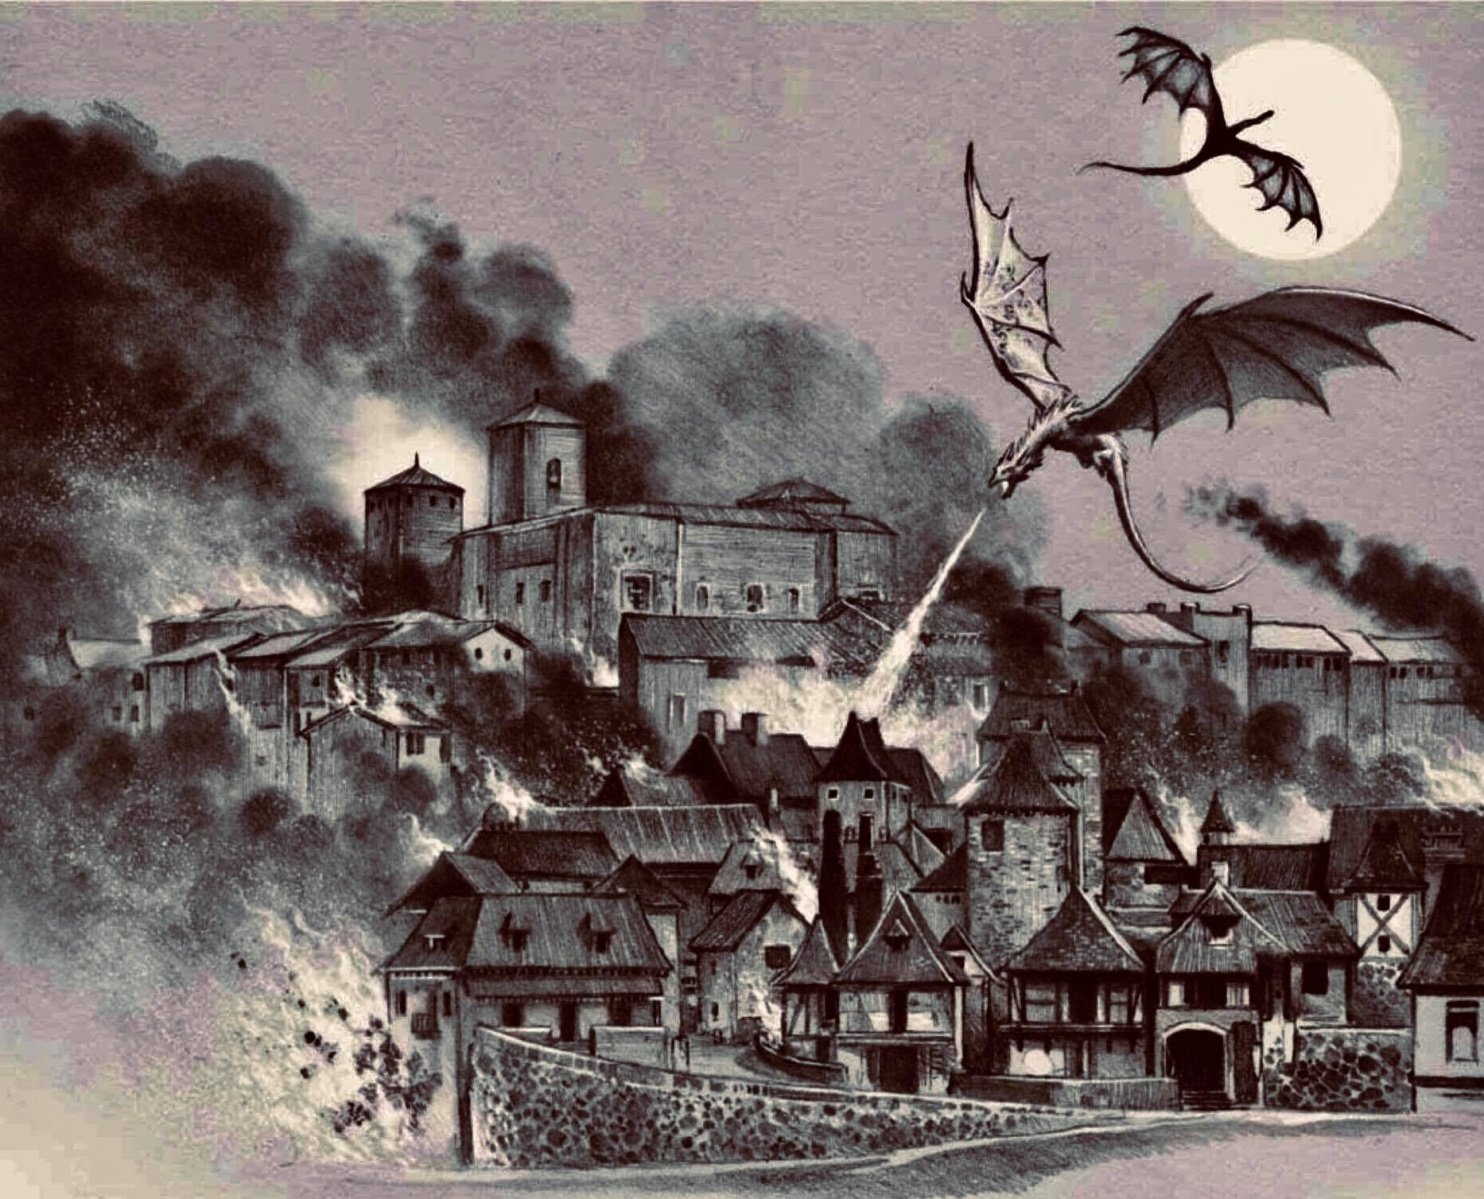 First Battle of Tumbleton as depicted by Douglas Wheatley in Fire & Blood.